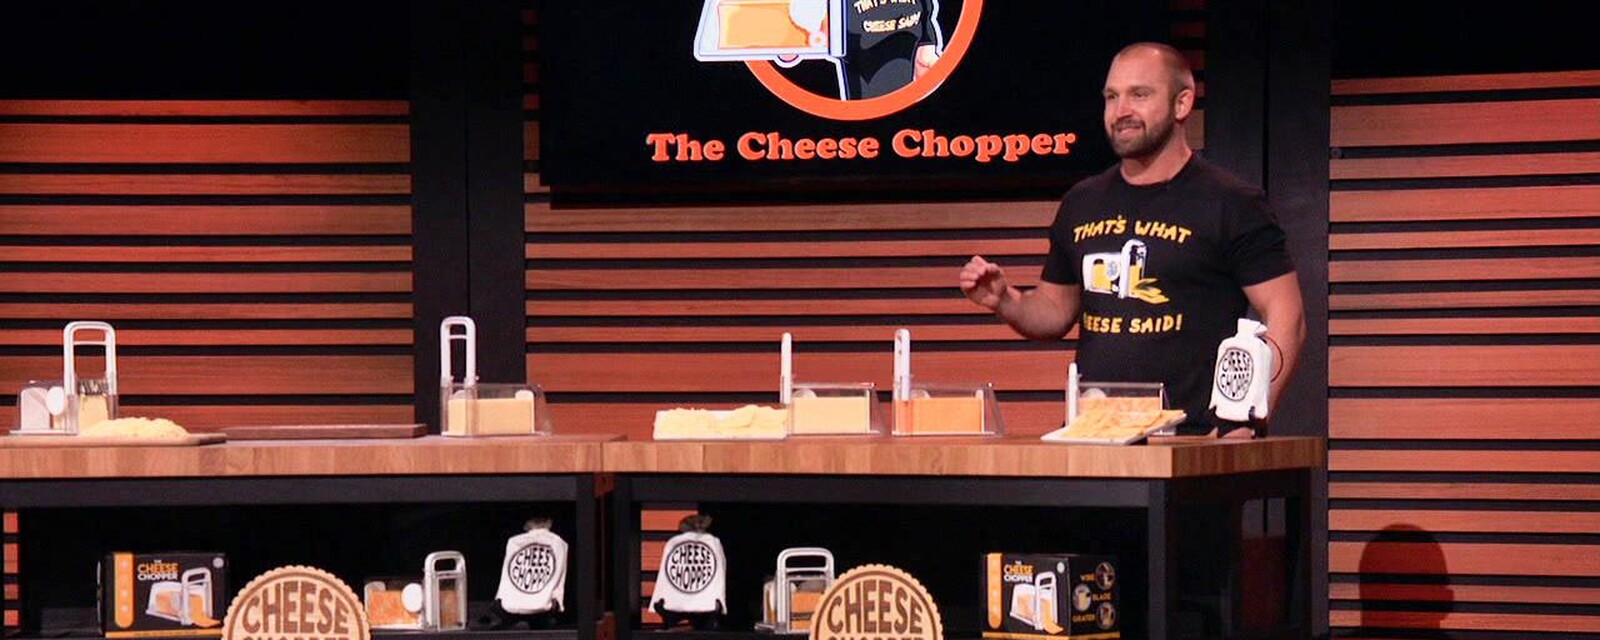 The Businesses and Products from Season 12, Episode 20 of Shark Tank